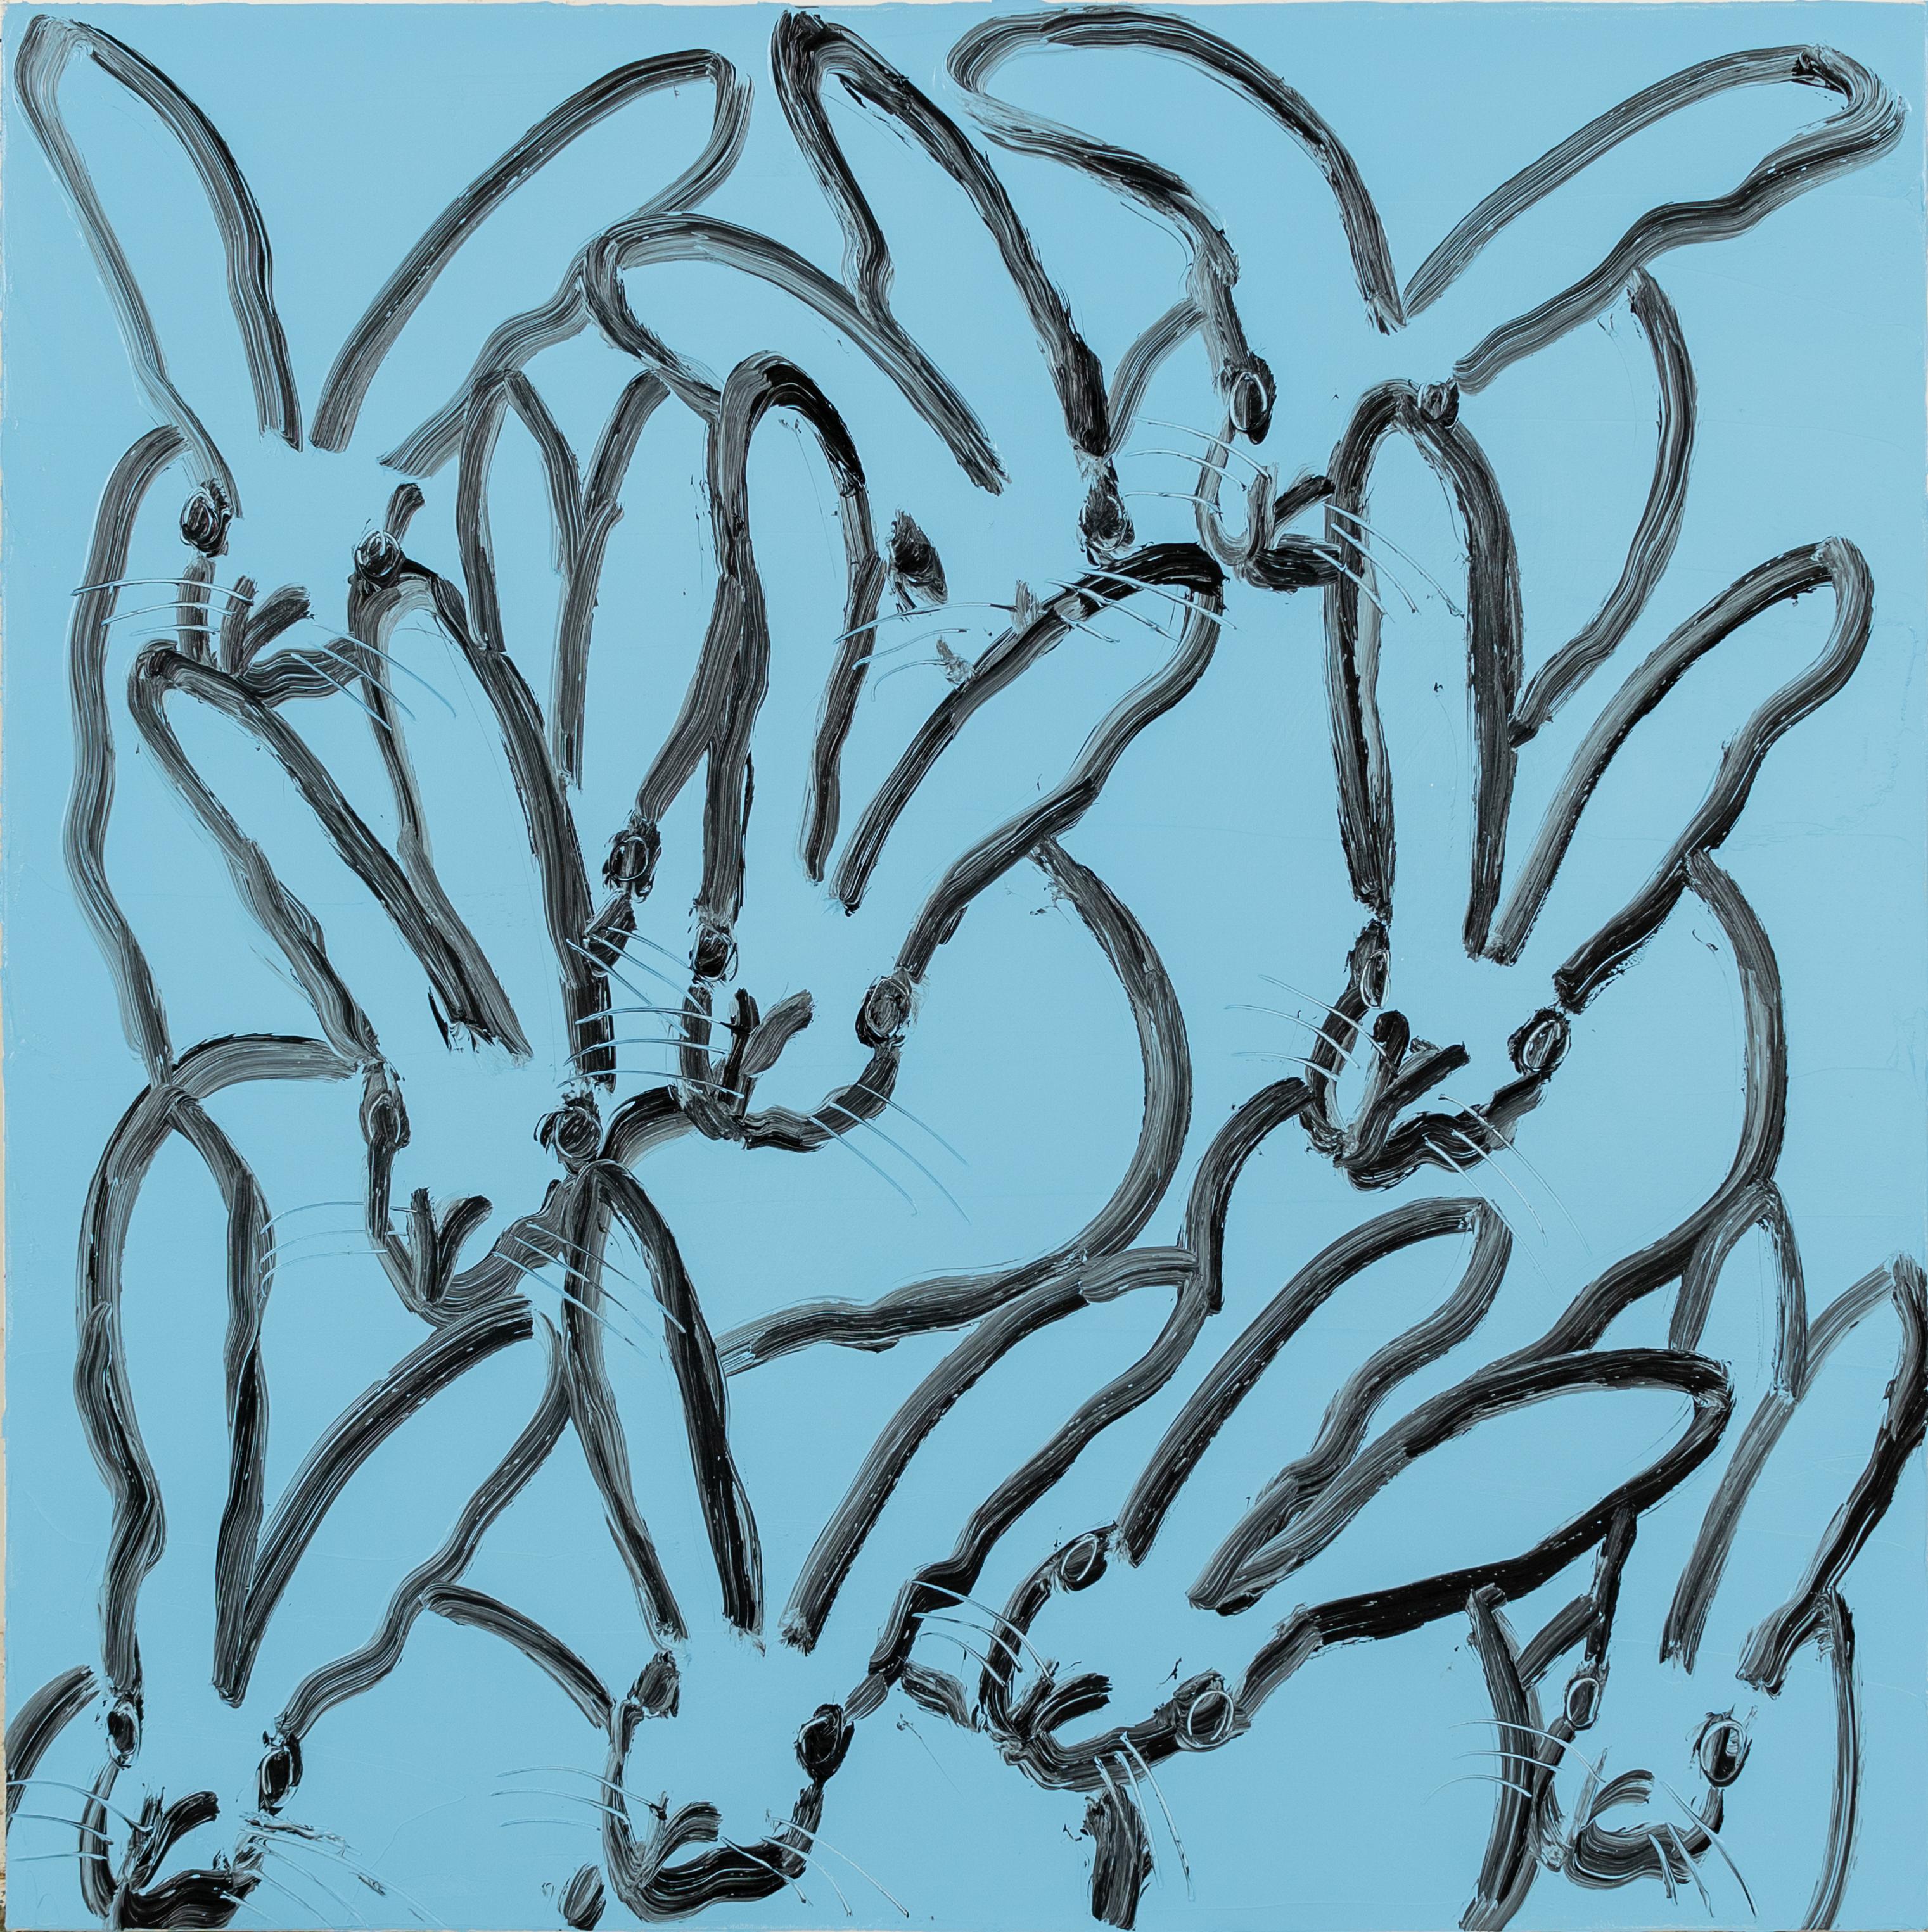 Blue Hutch- square, gestural blue and black bunny painting by hunt slonem - Painting by Hunt Slonem